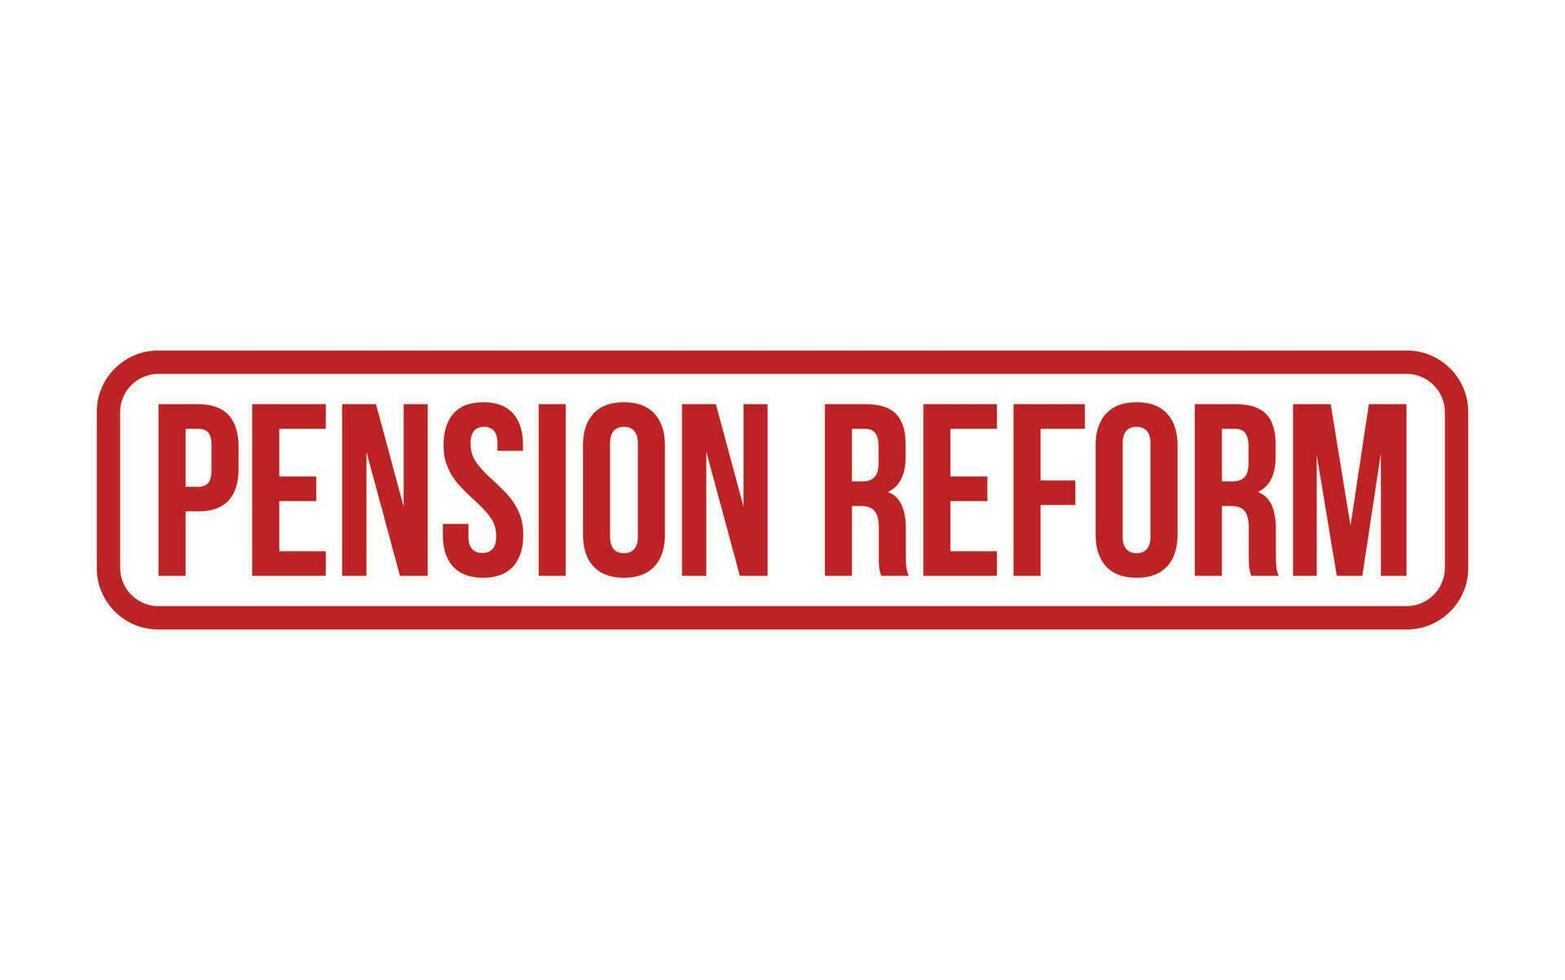 Red Pension Reform Rubber Stamp Seal Vector